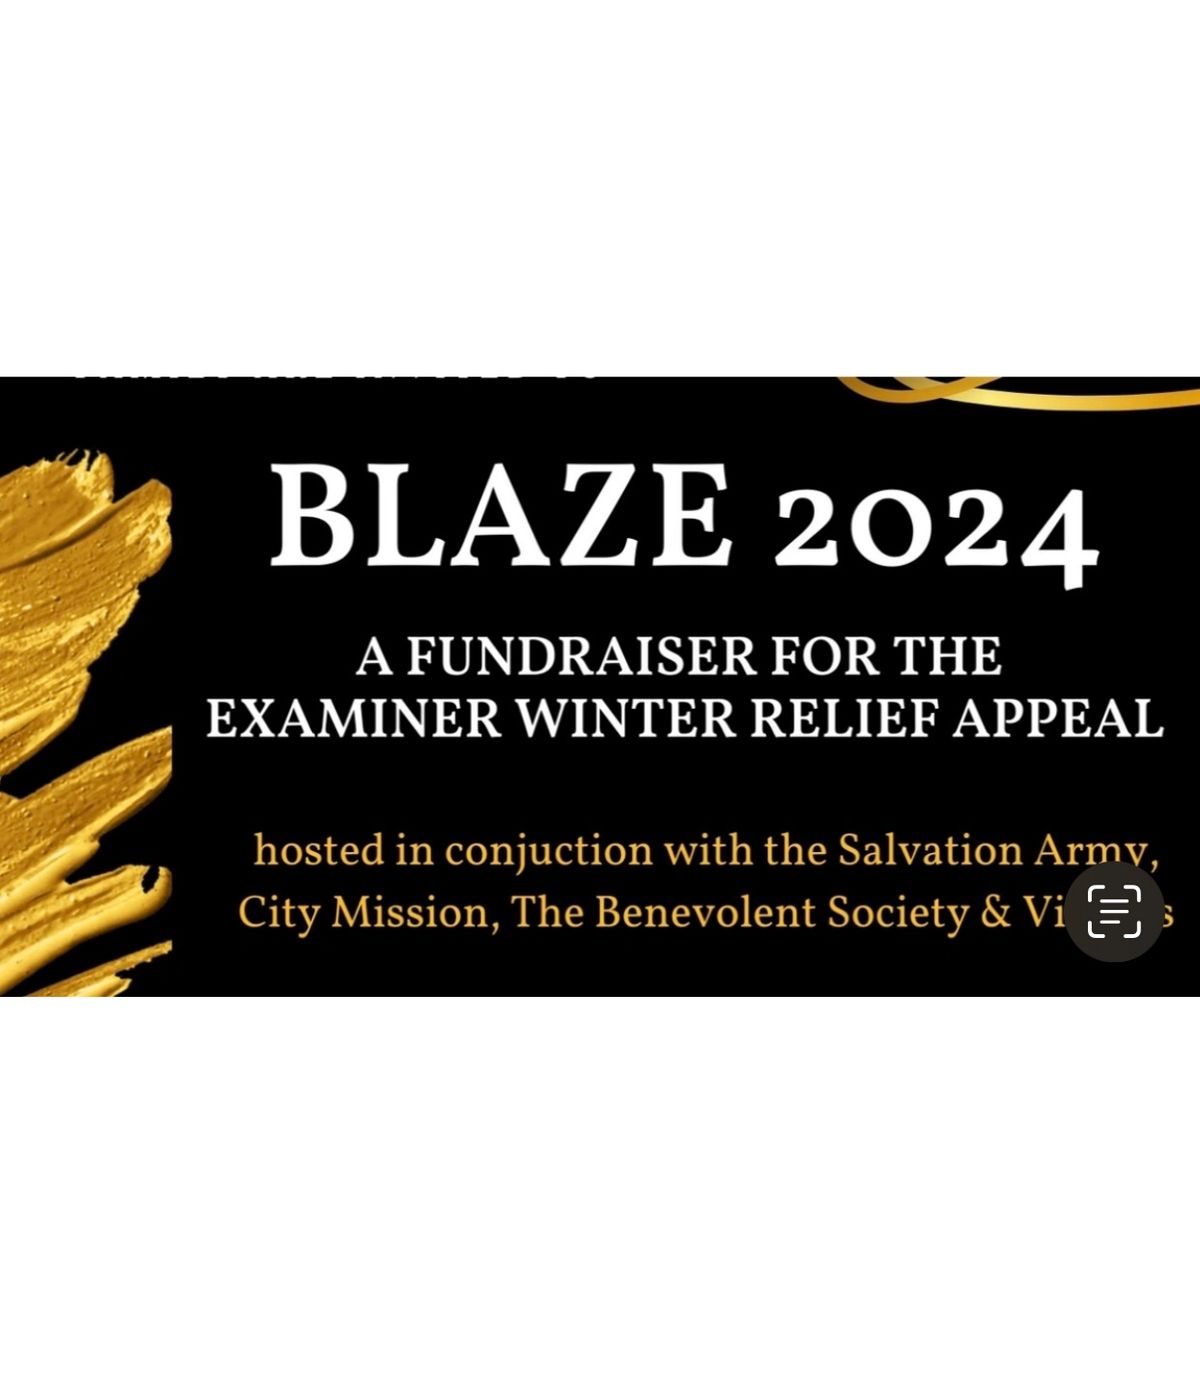 BLAZE A fundraiser for the Examiner Winter Relief Appeal